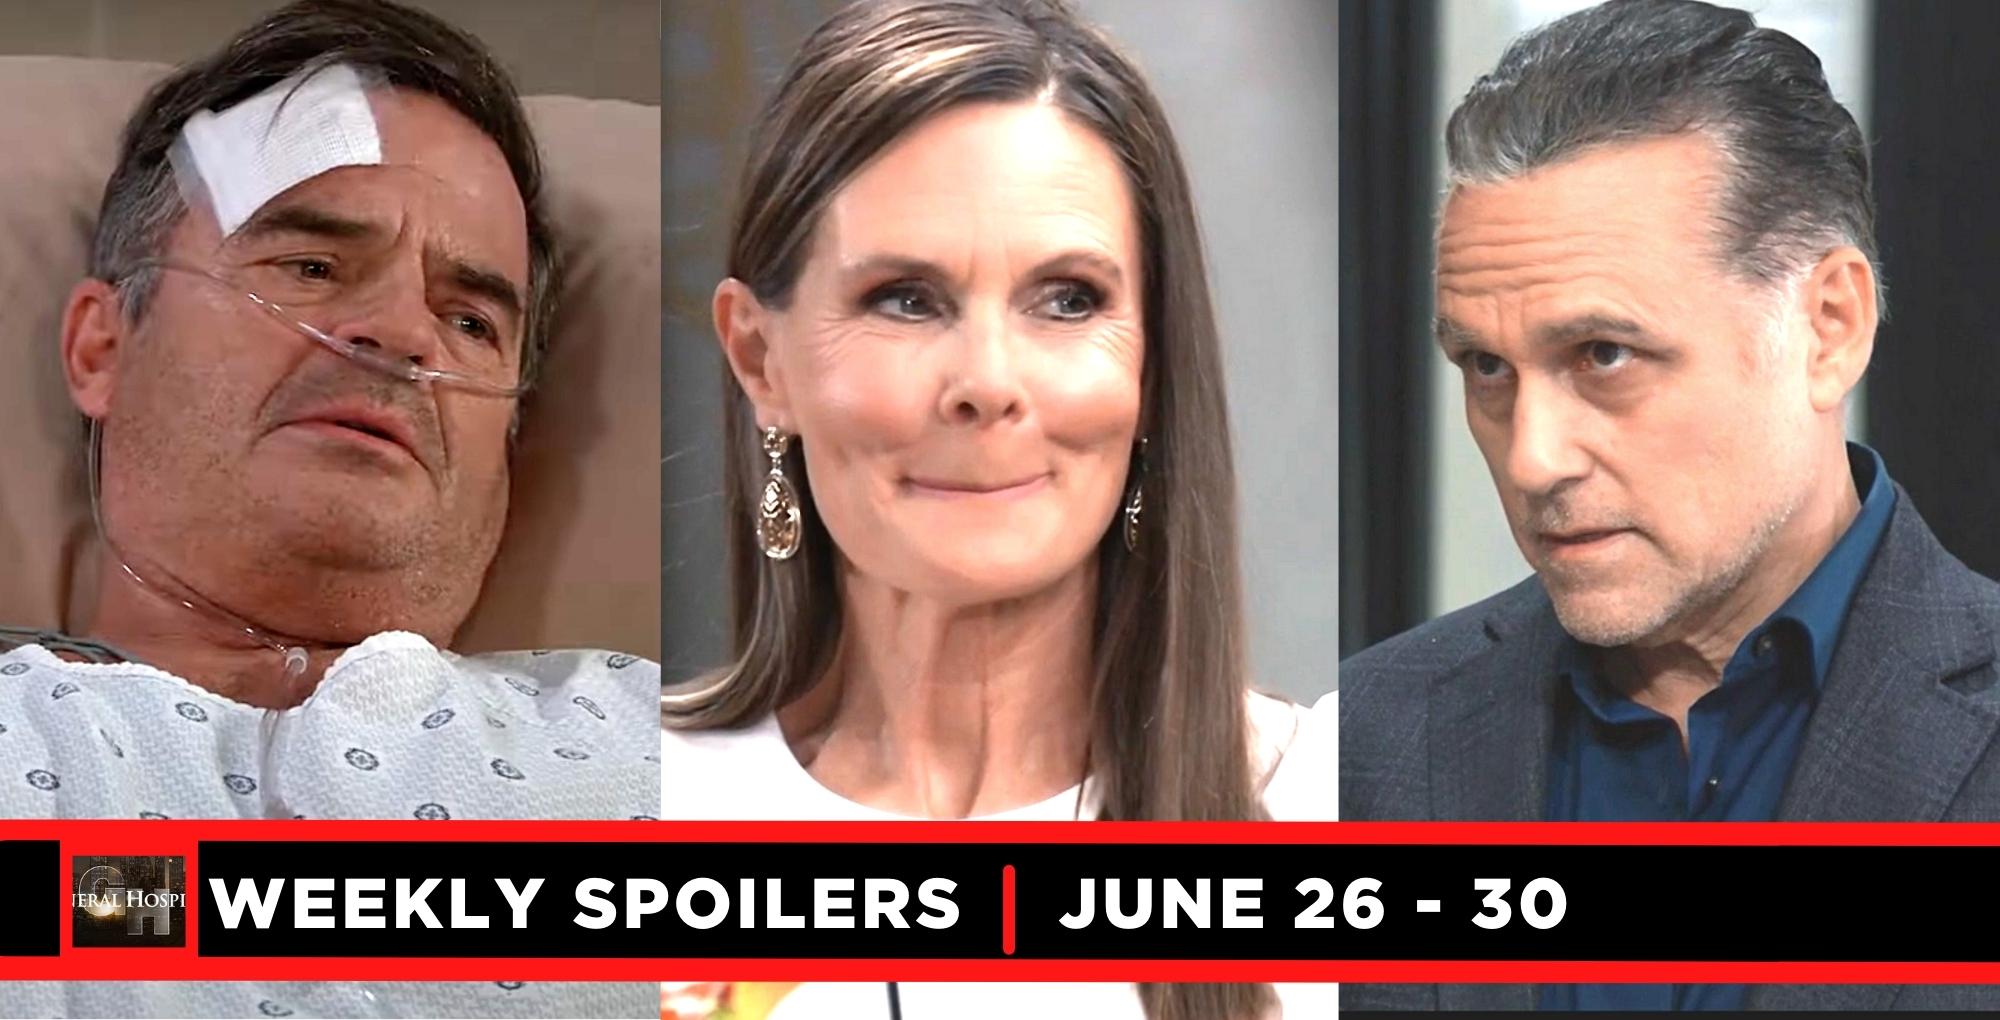 weekly the general hospital spoilers for june 26-june 30, 2023, 3 images, ned, lucy, sonny.